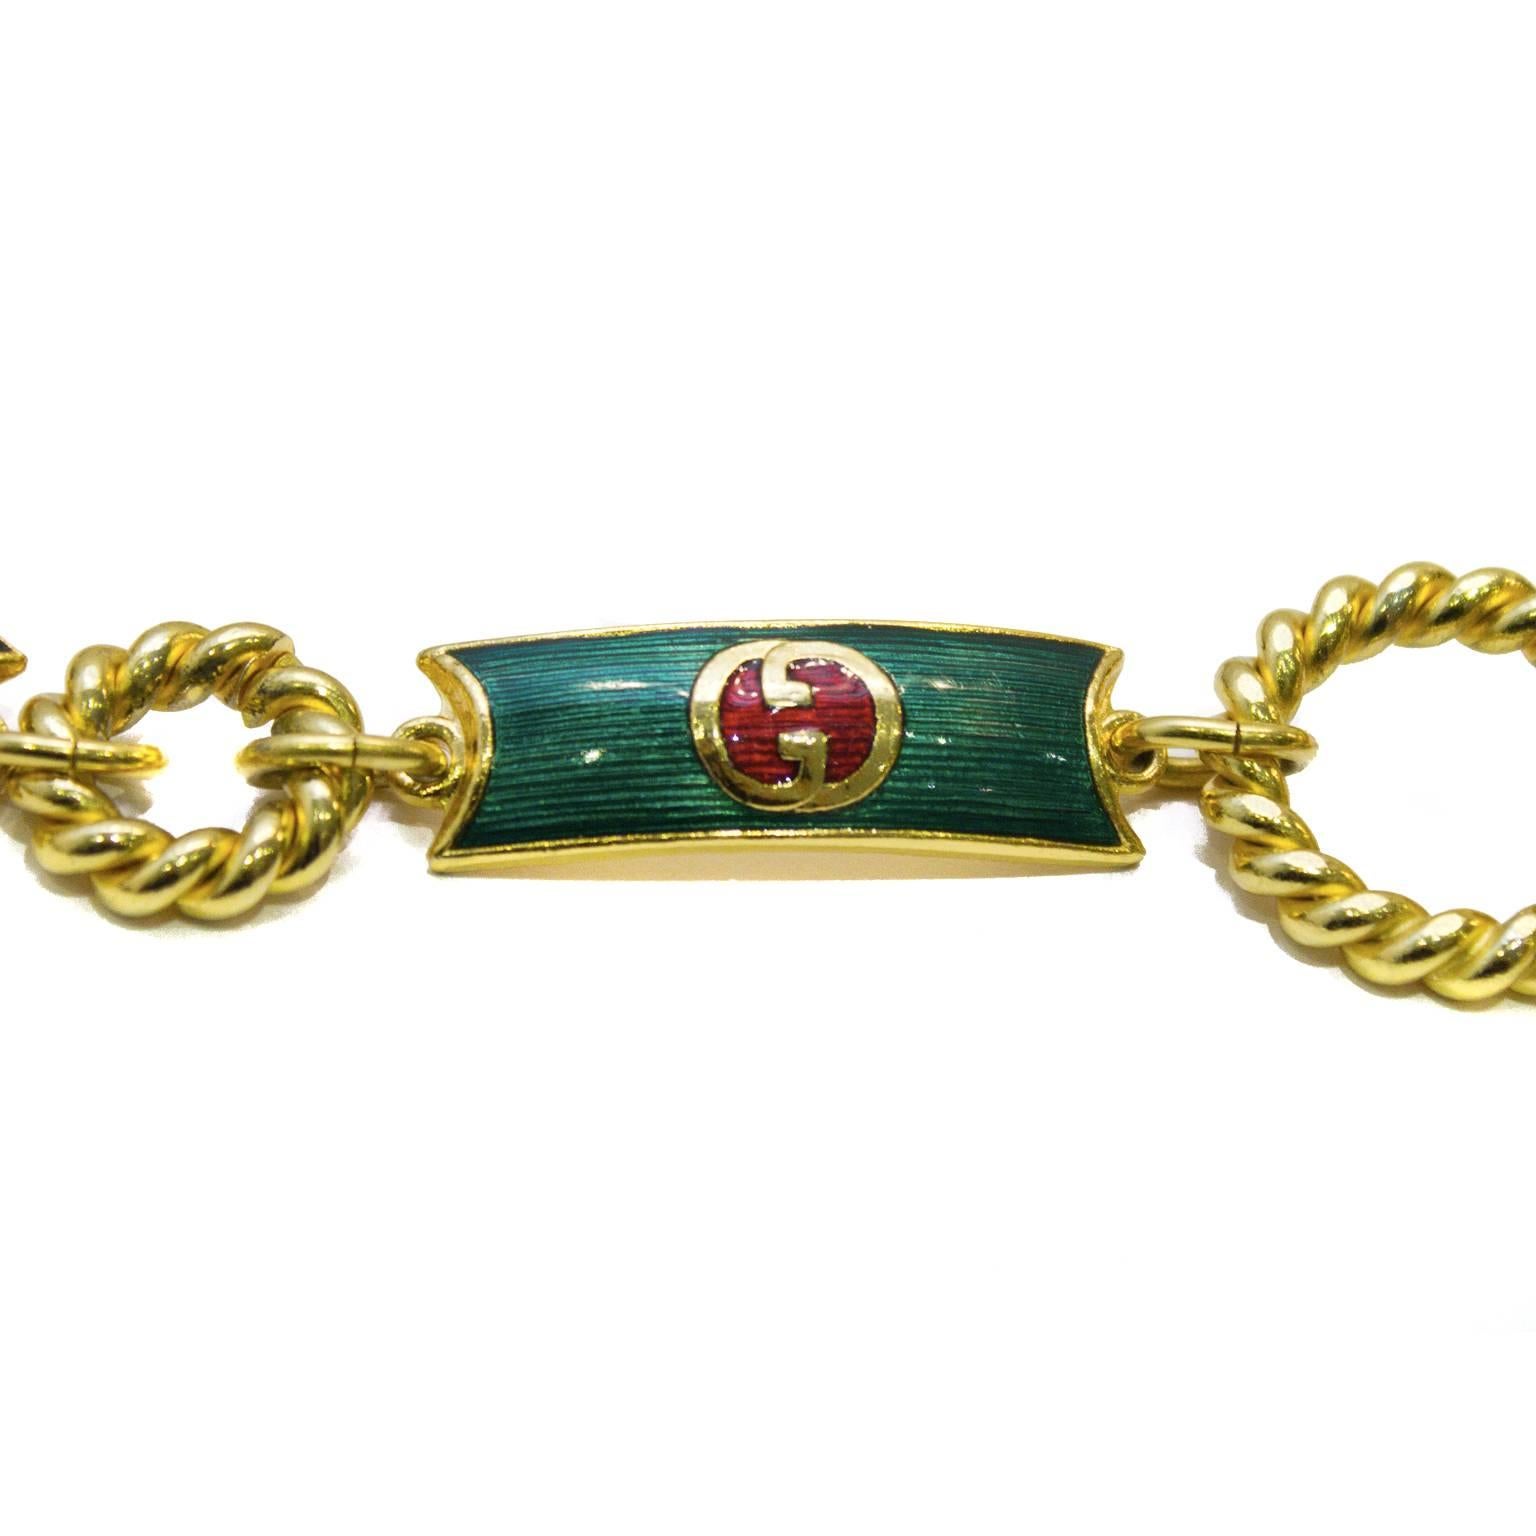 Amazing rare Gucci green, red and gold tone metal belt from the 1970's. The green enamel coats each link with the Gucci logo in its centre, in red and gold. Loop and bar allows for an adjustable waist. Excellent vintage condition.